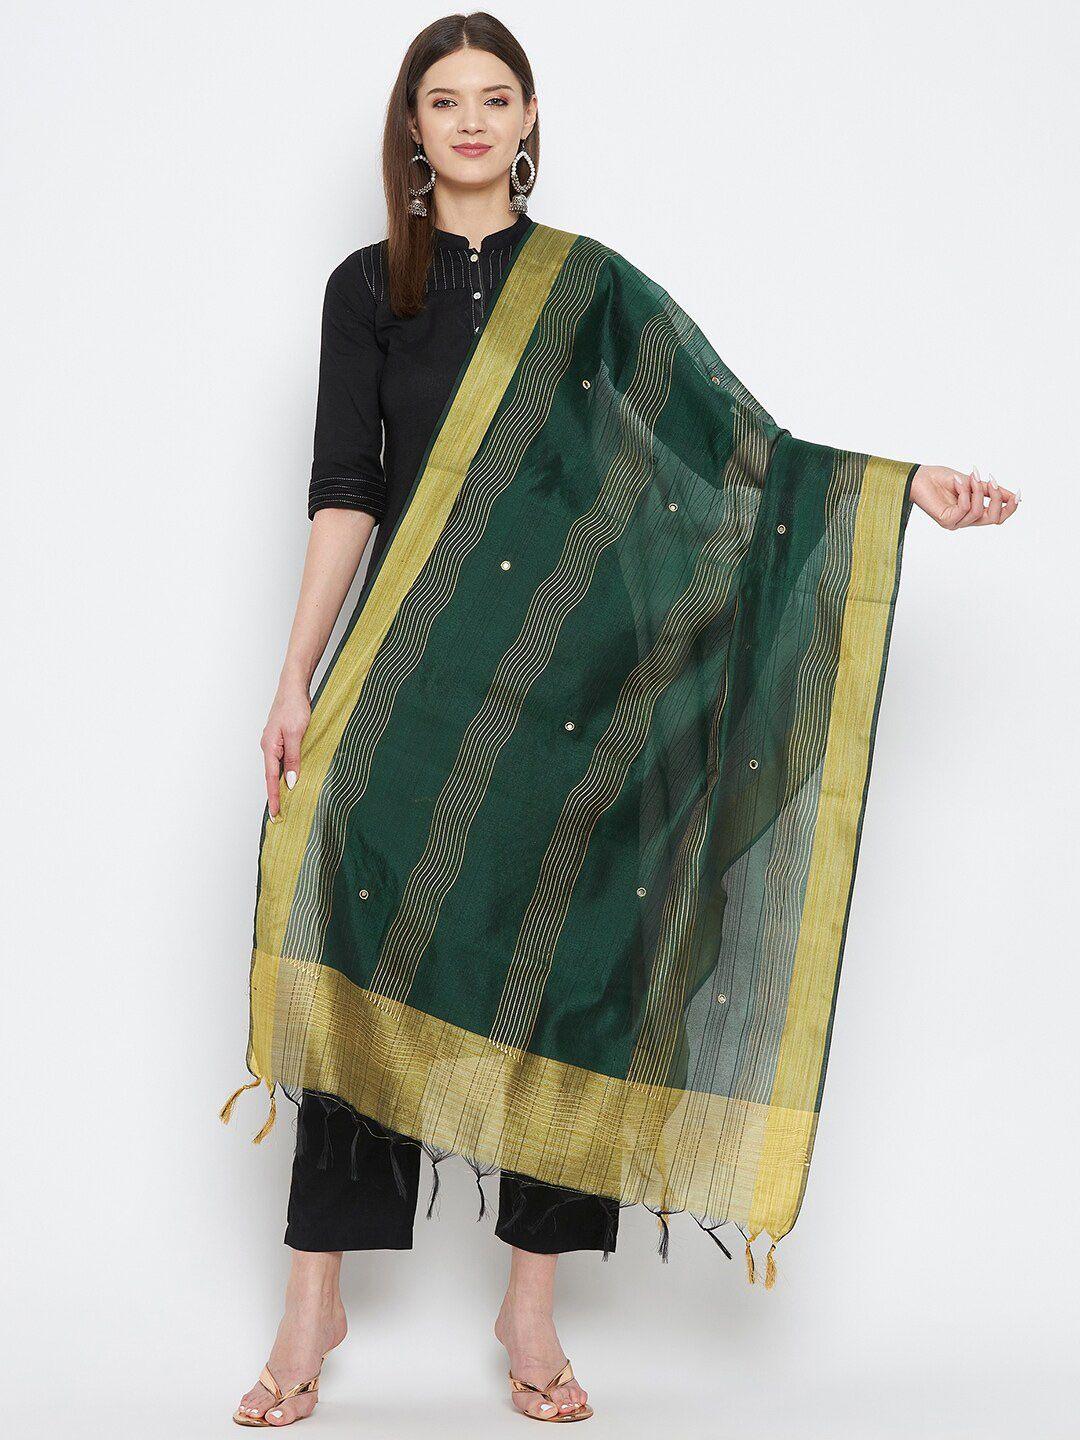 clora creation green & beige striped dupatta with beads and stones